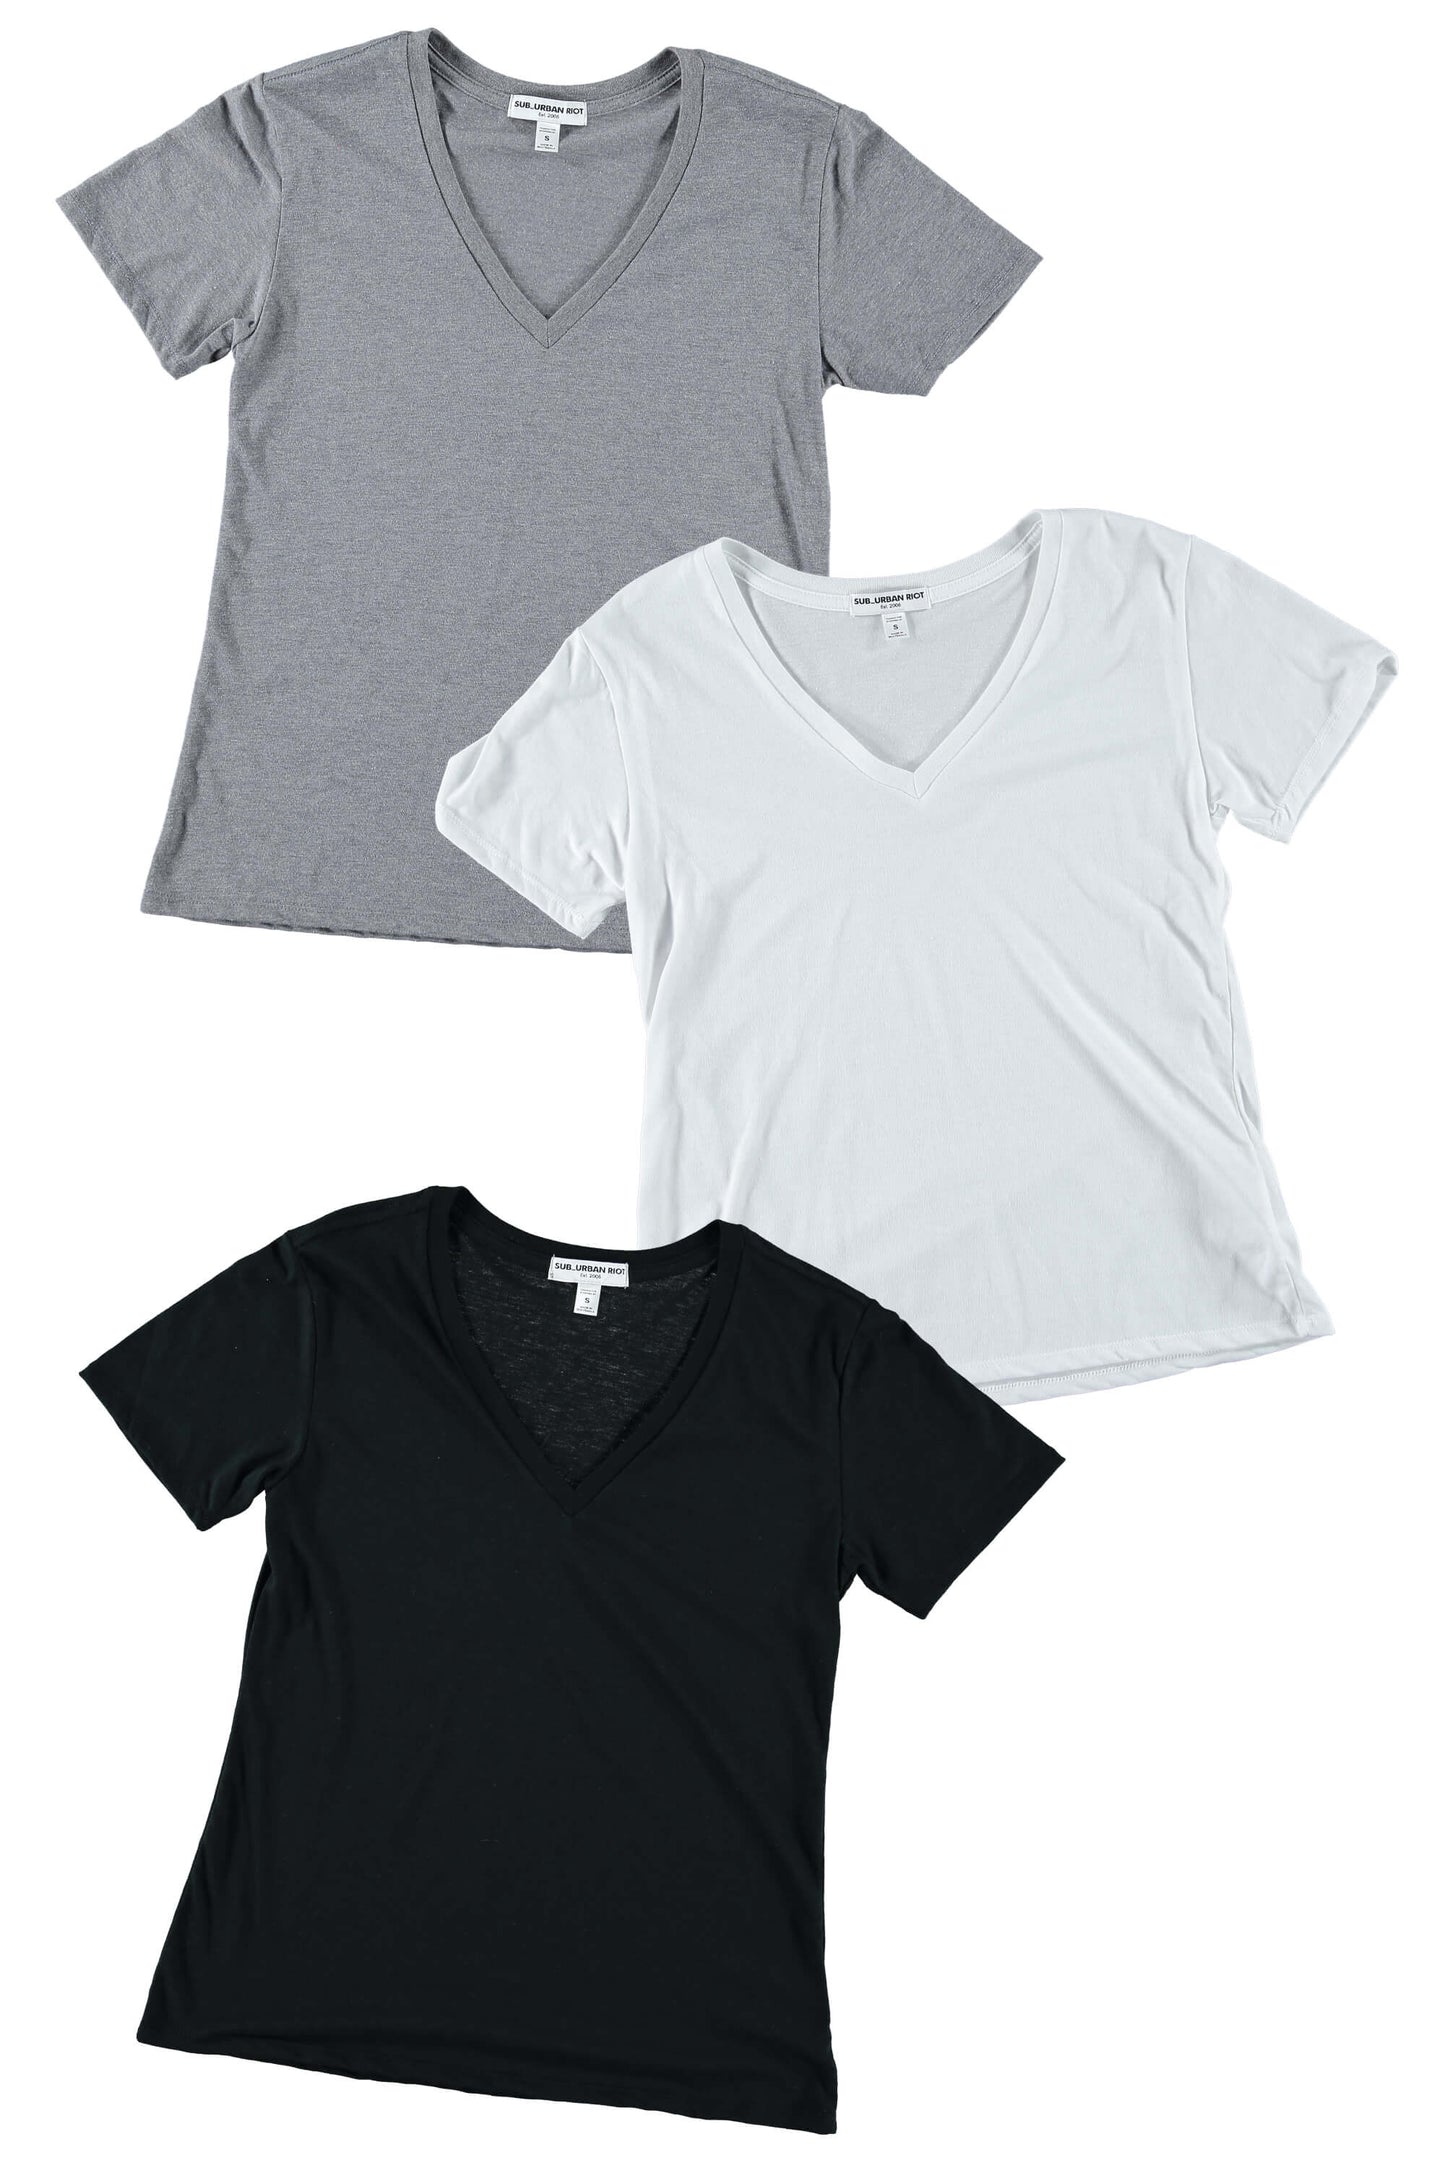 The Perfect V-Neck Tee